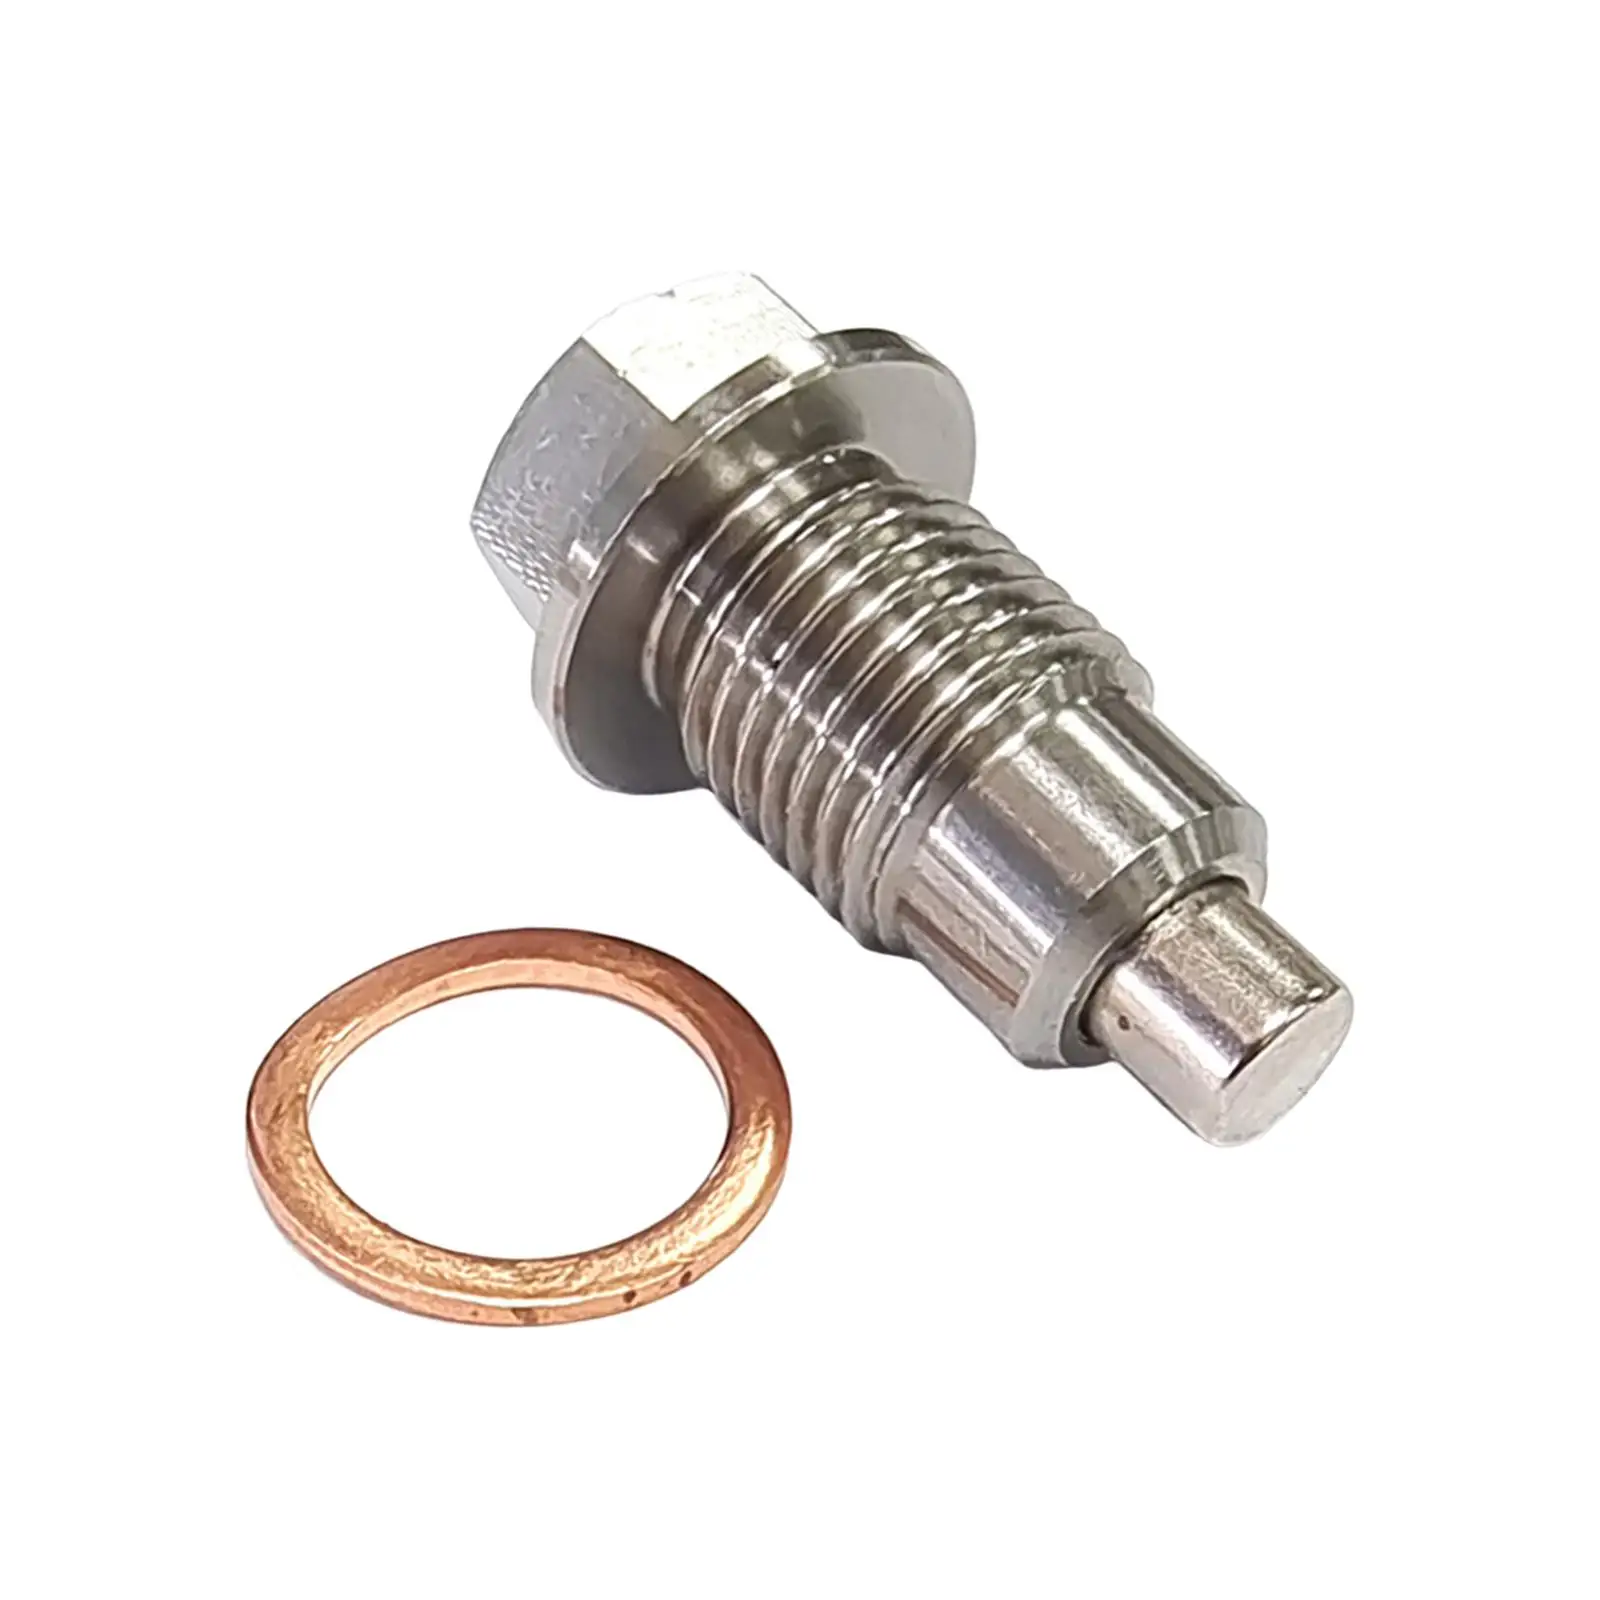 Oil Drain Plug Screw M12x1.25 Replace Stainless Steel with Cooper Washer Oil Pan Drain Plug Sump Drain Nut for Motorcycle